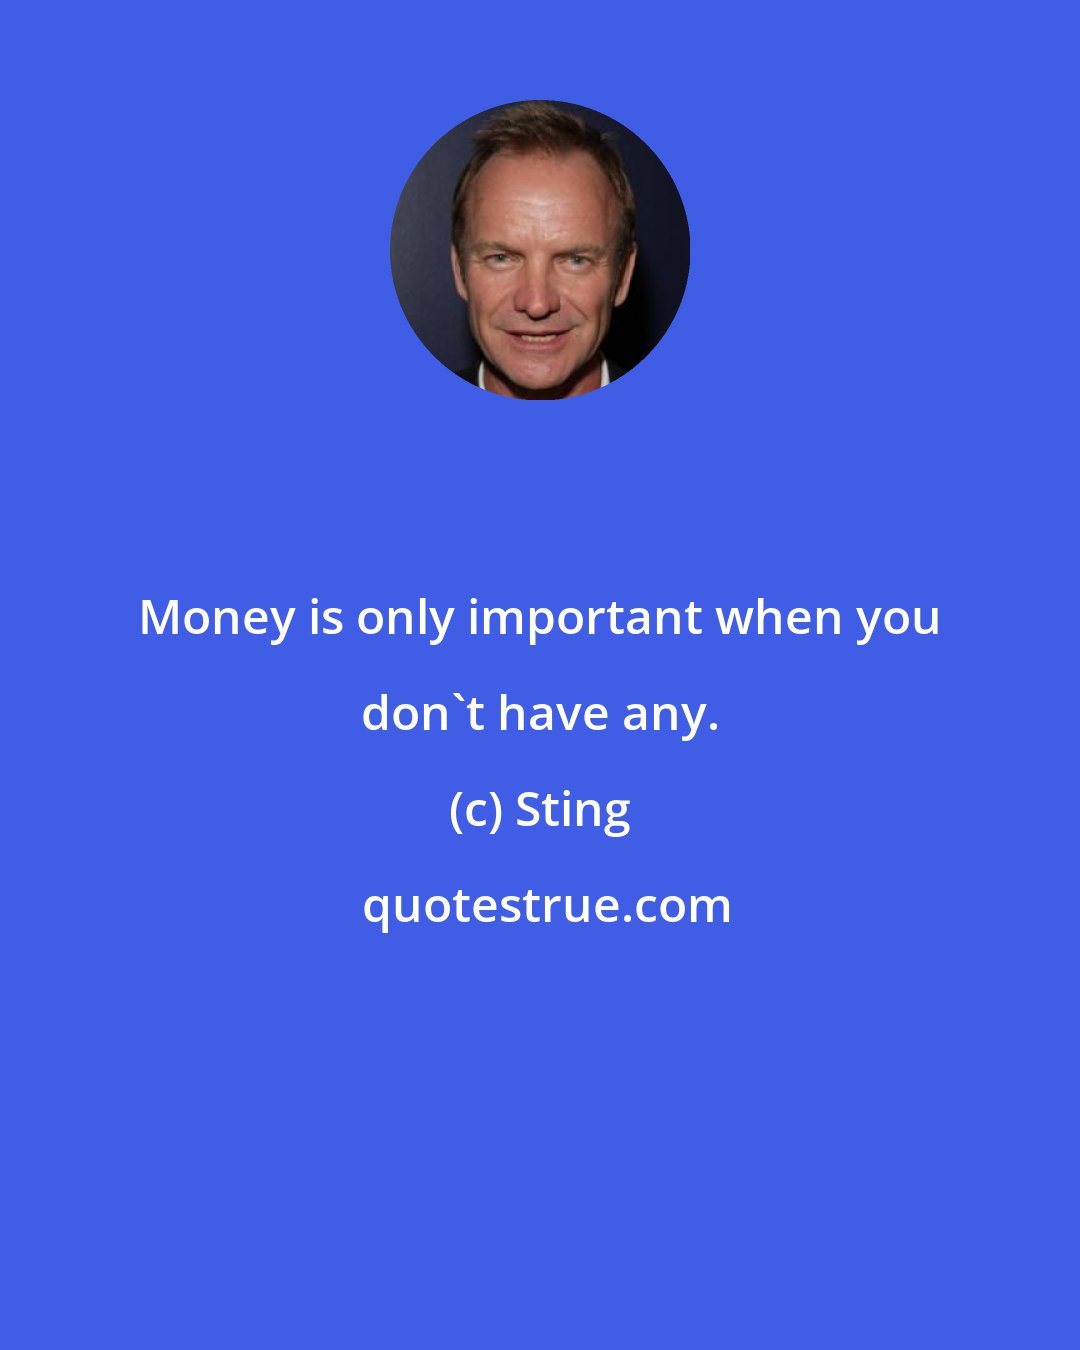 Sting: Money is only important when you don't have any.